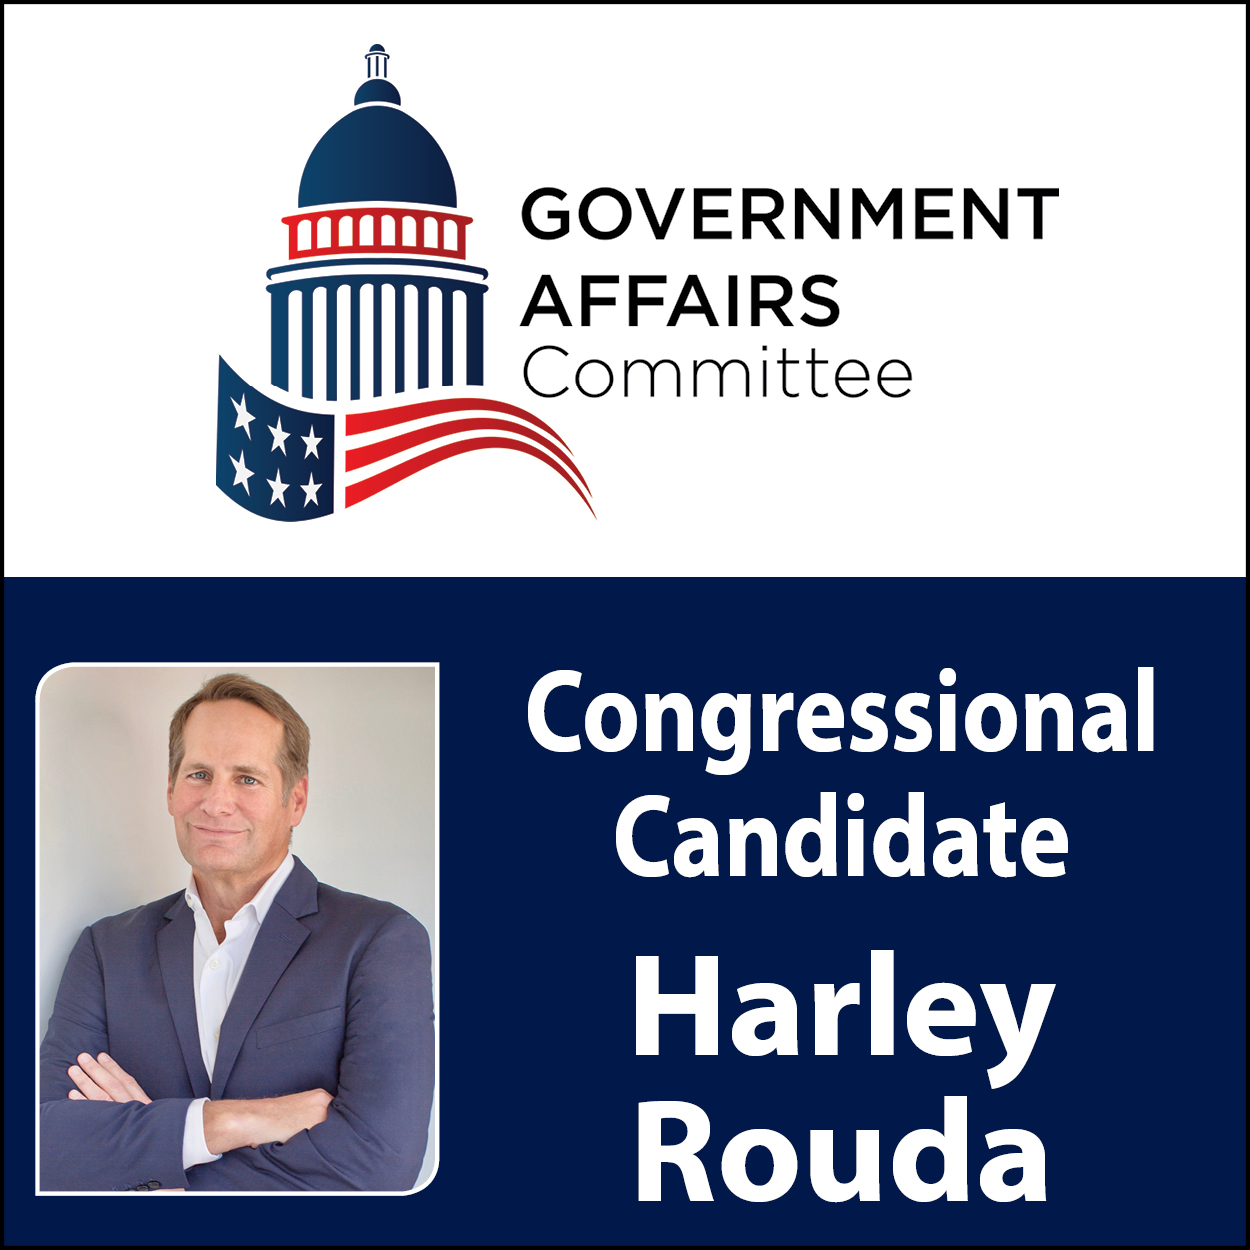 October Government Affairs Committee: Congressional Candidate Harley Rouda